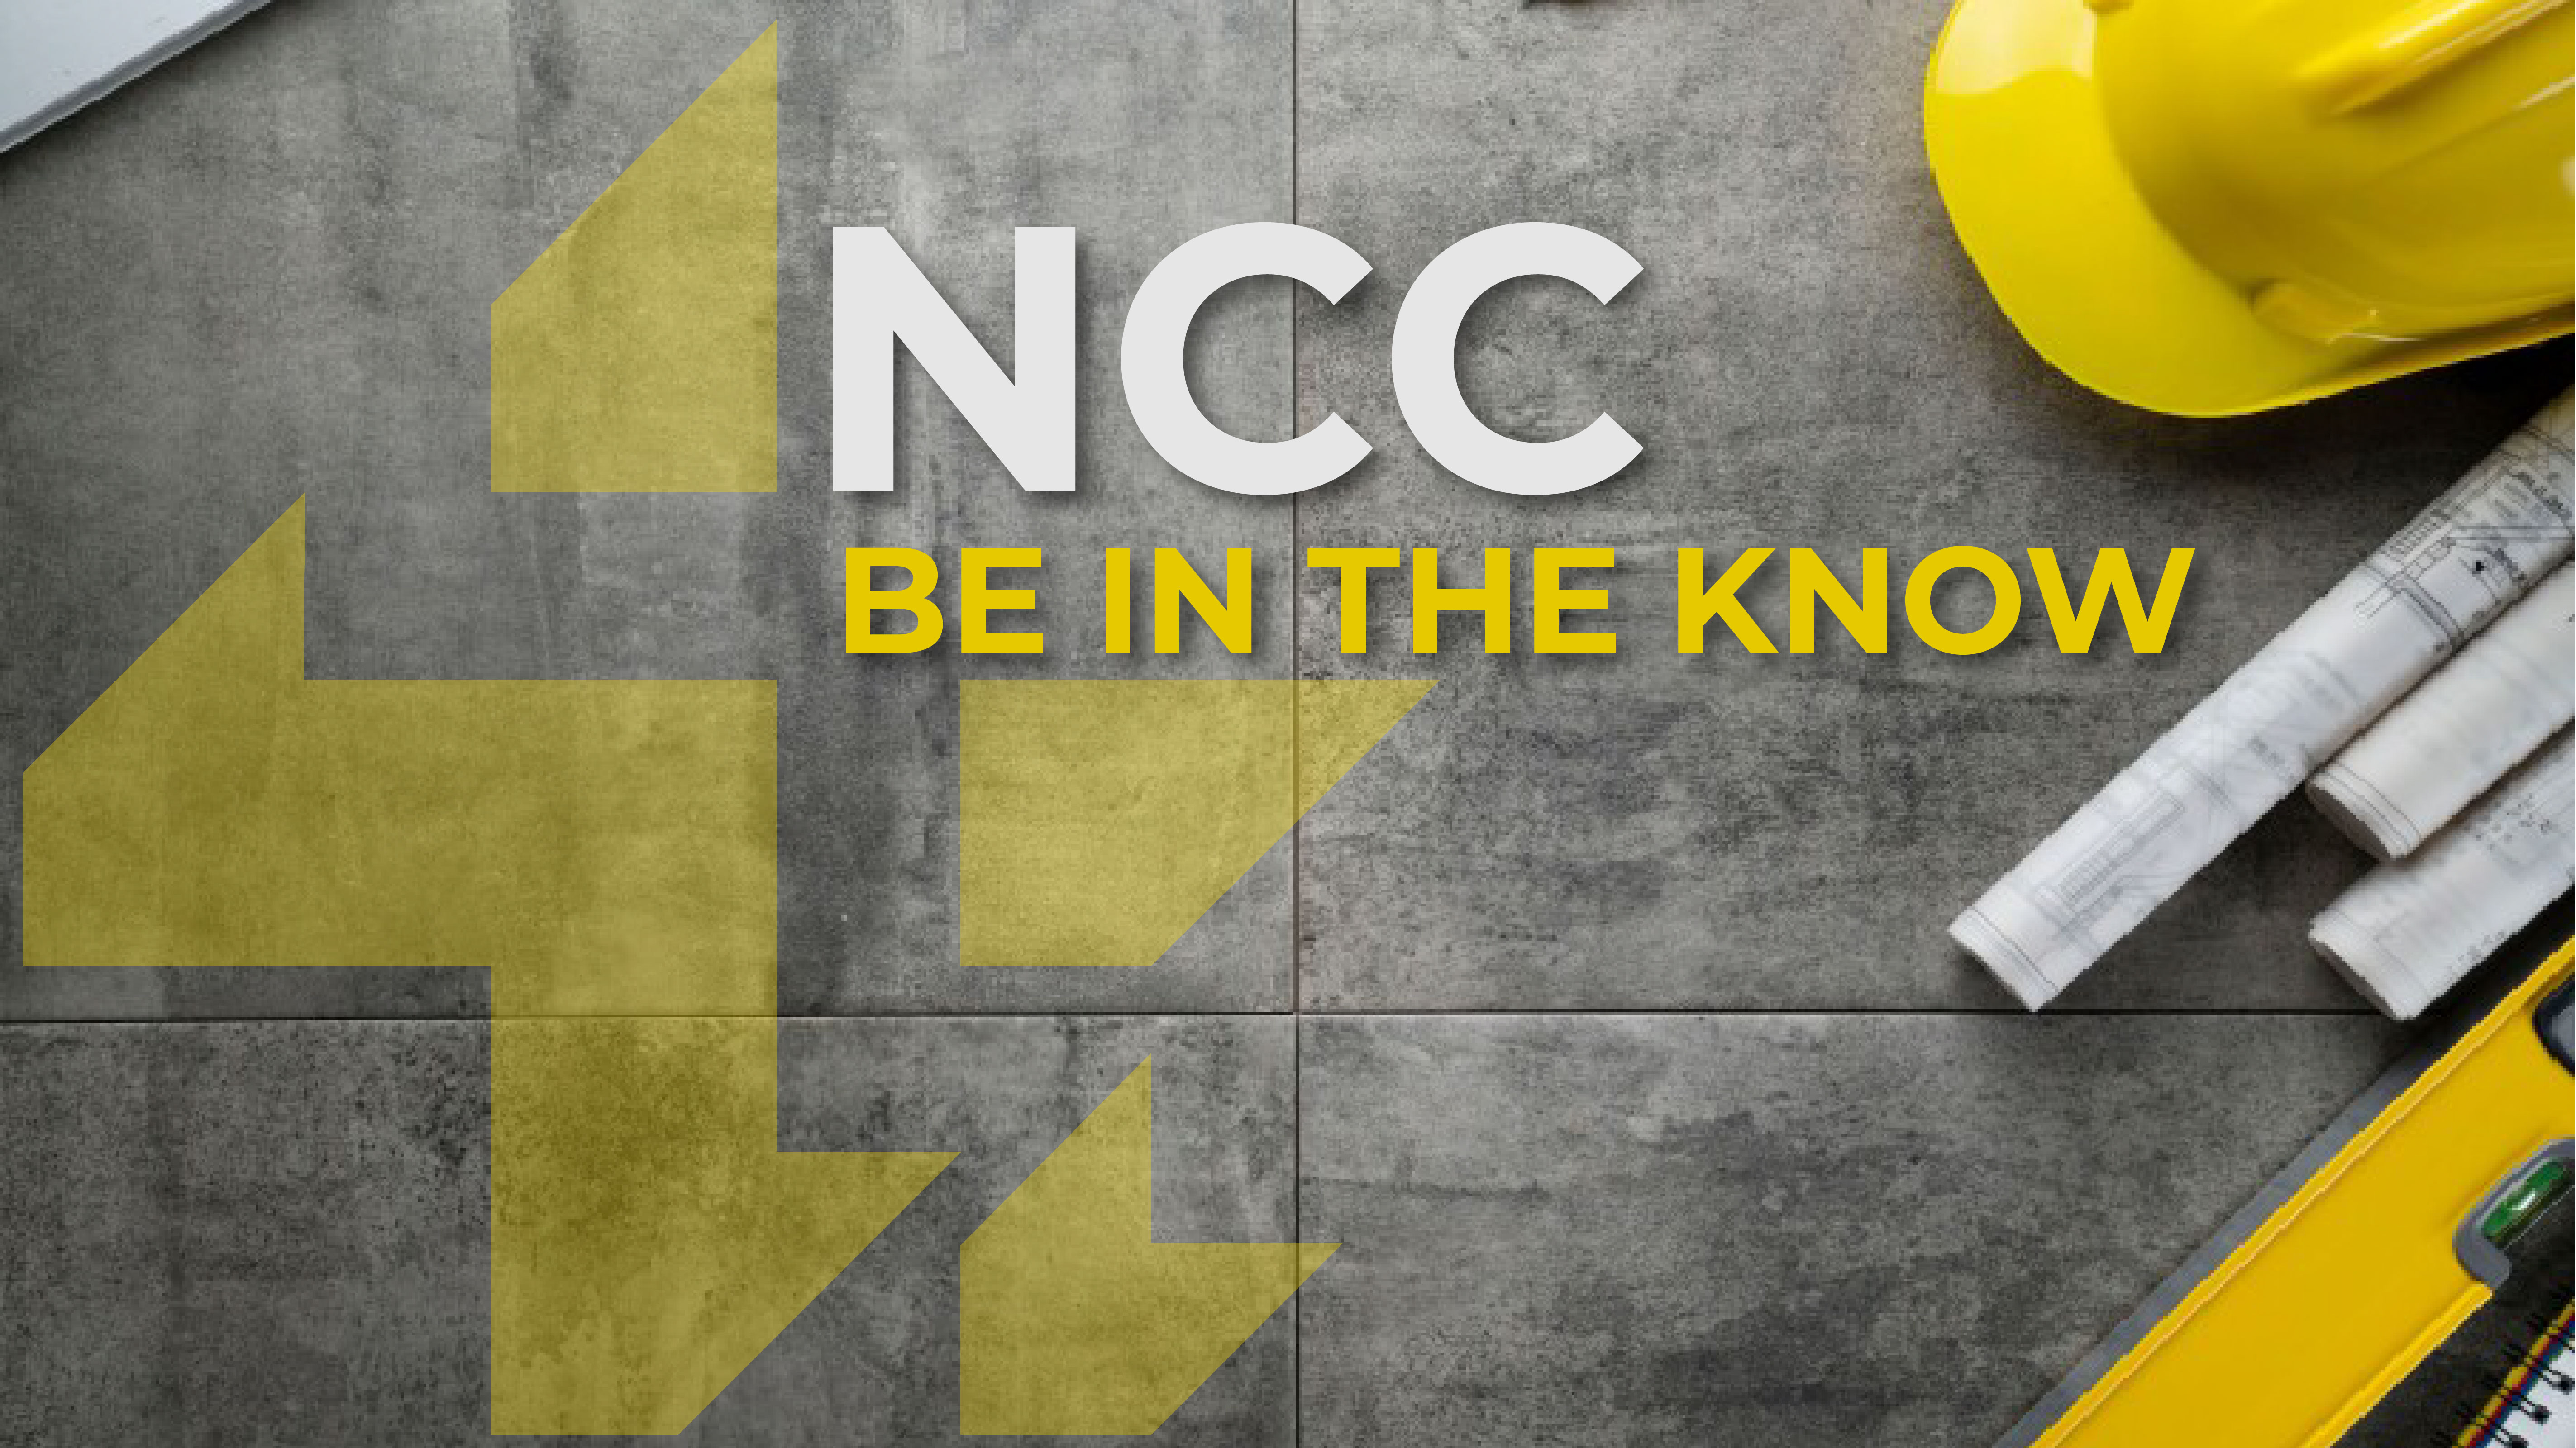 What do the NCC changes mean for your business?